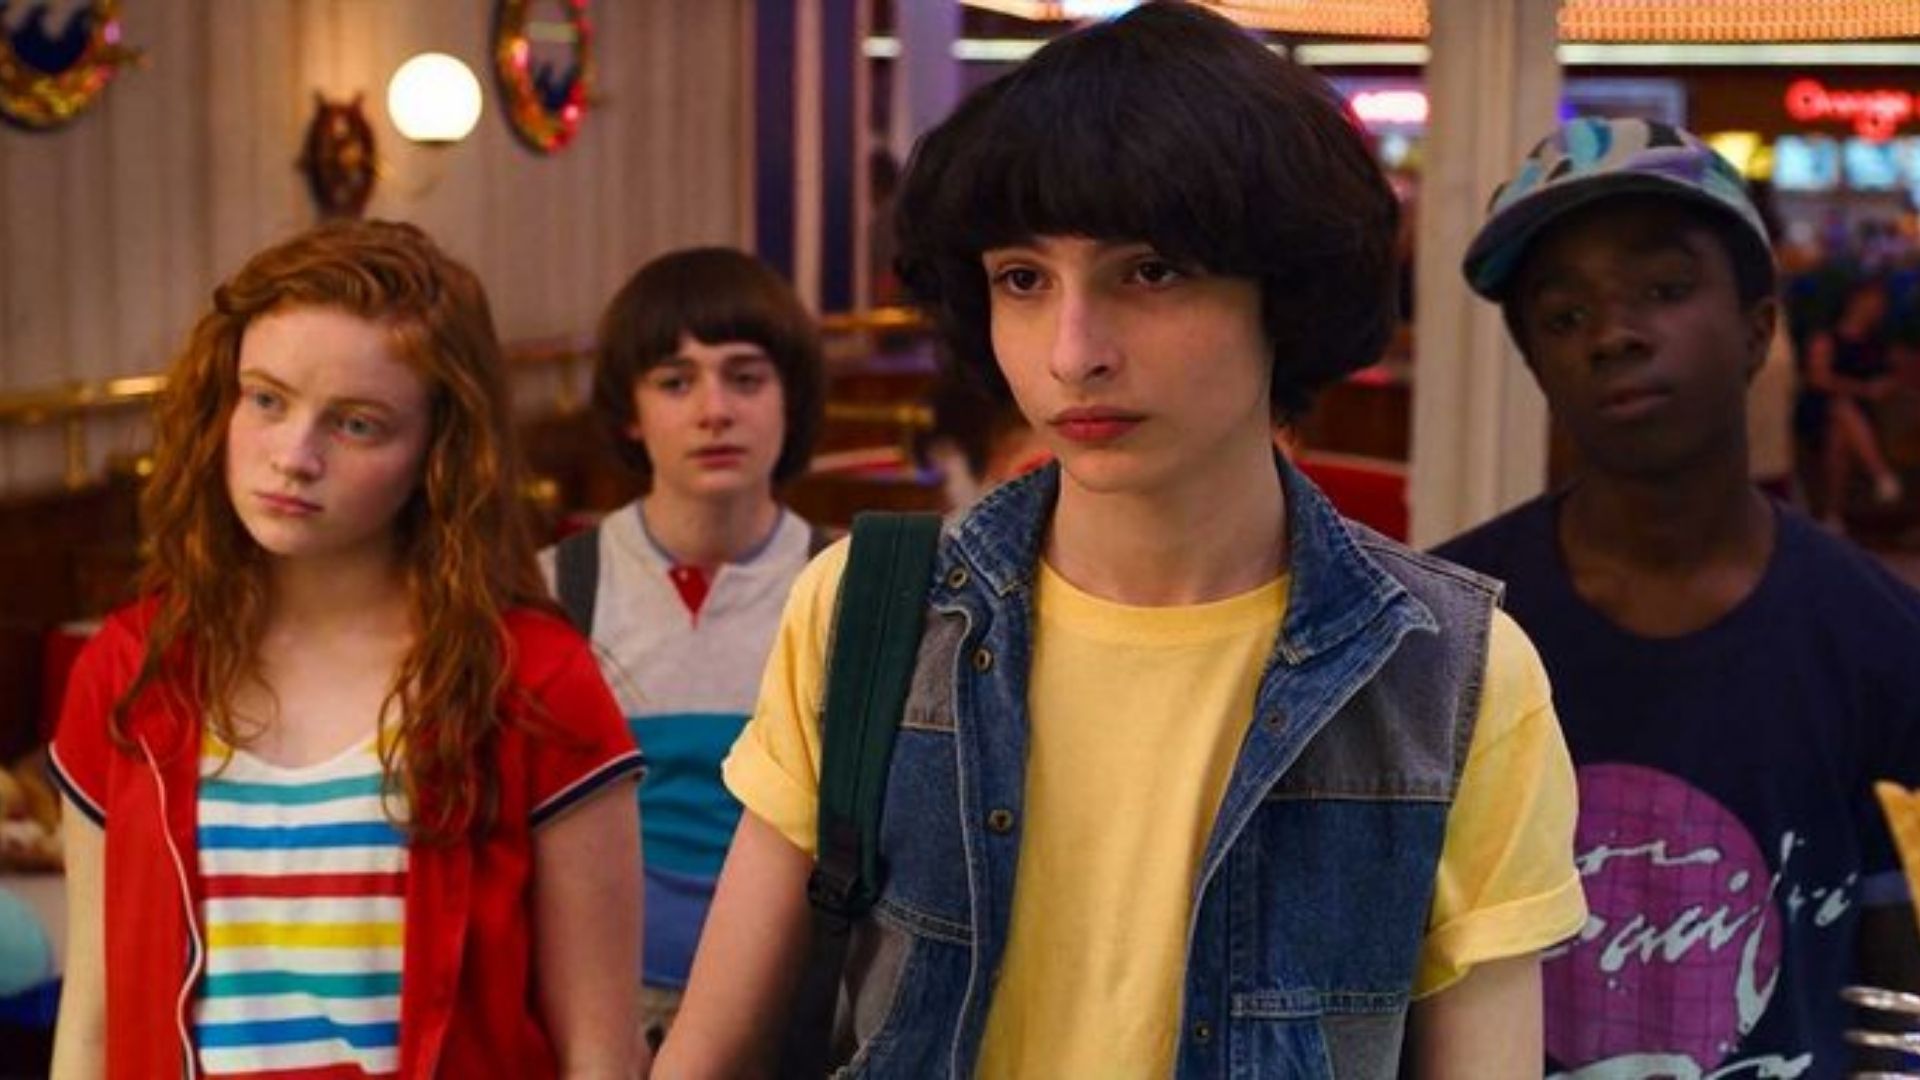 Stranger Things season 4 everything you need to know: release date, fan theories, cast and more | Cosmopolitan East